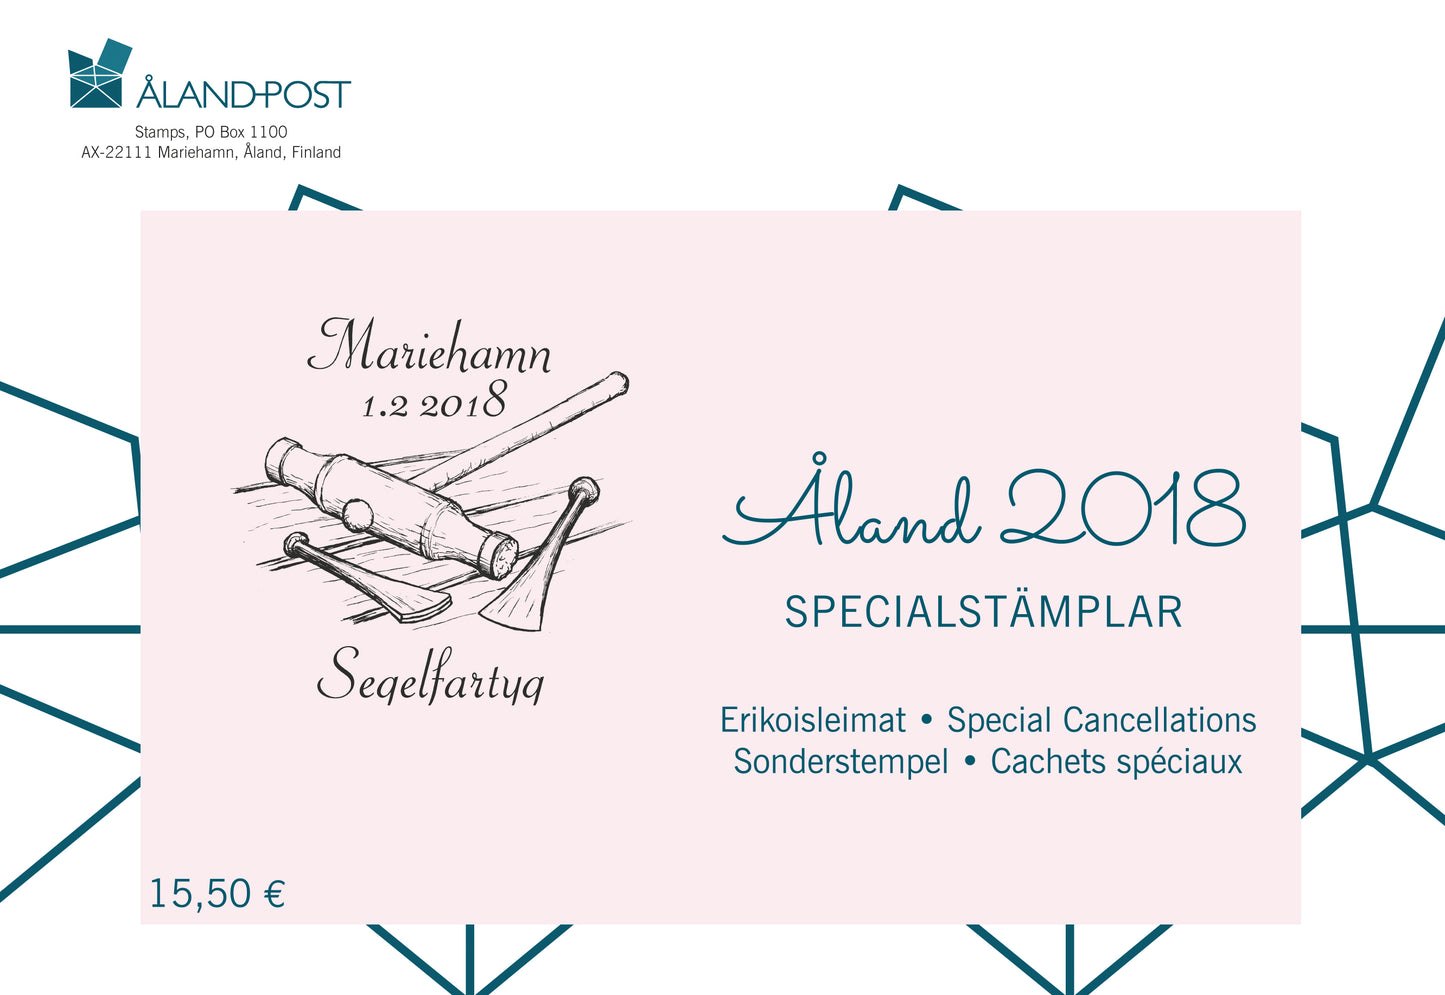 Special cancellation pack 2018